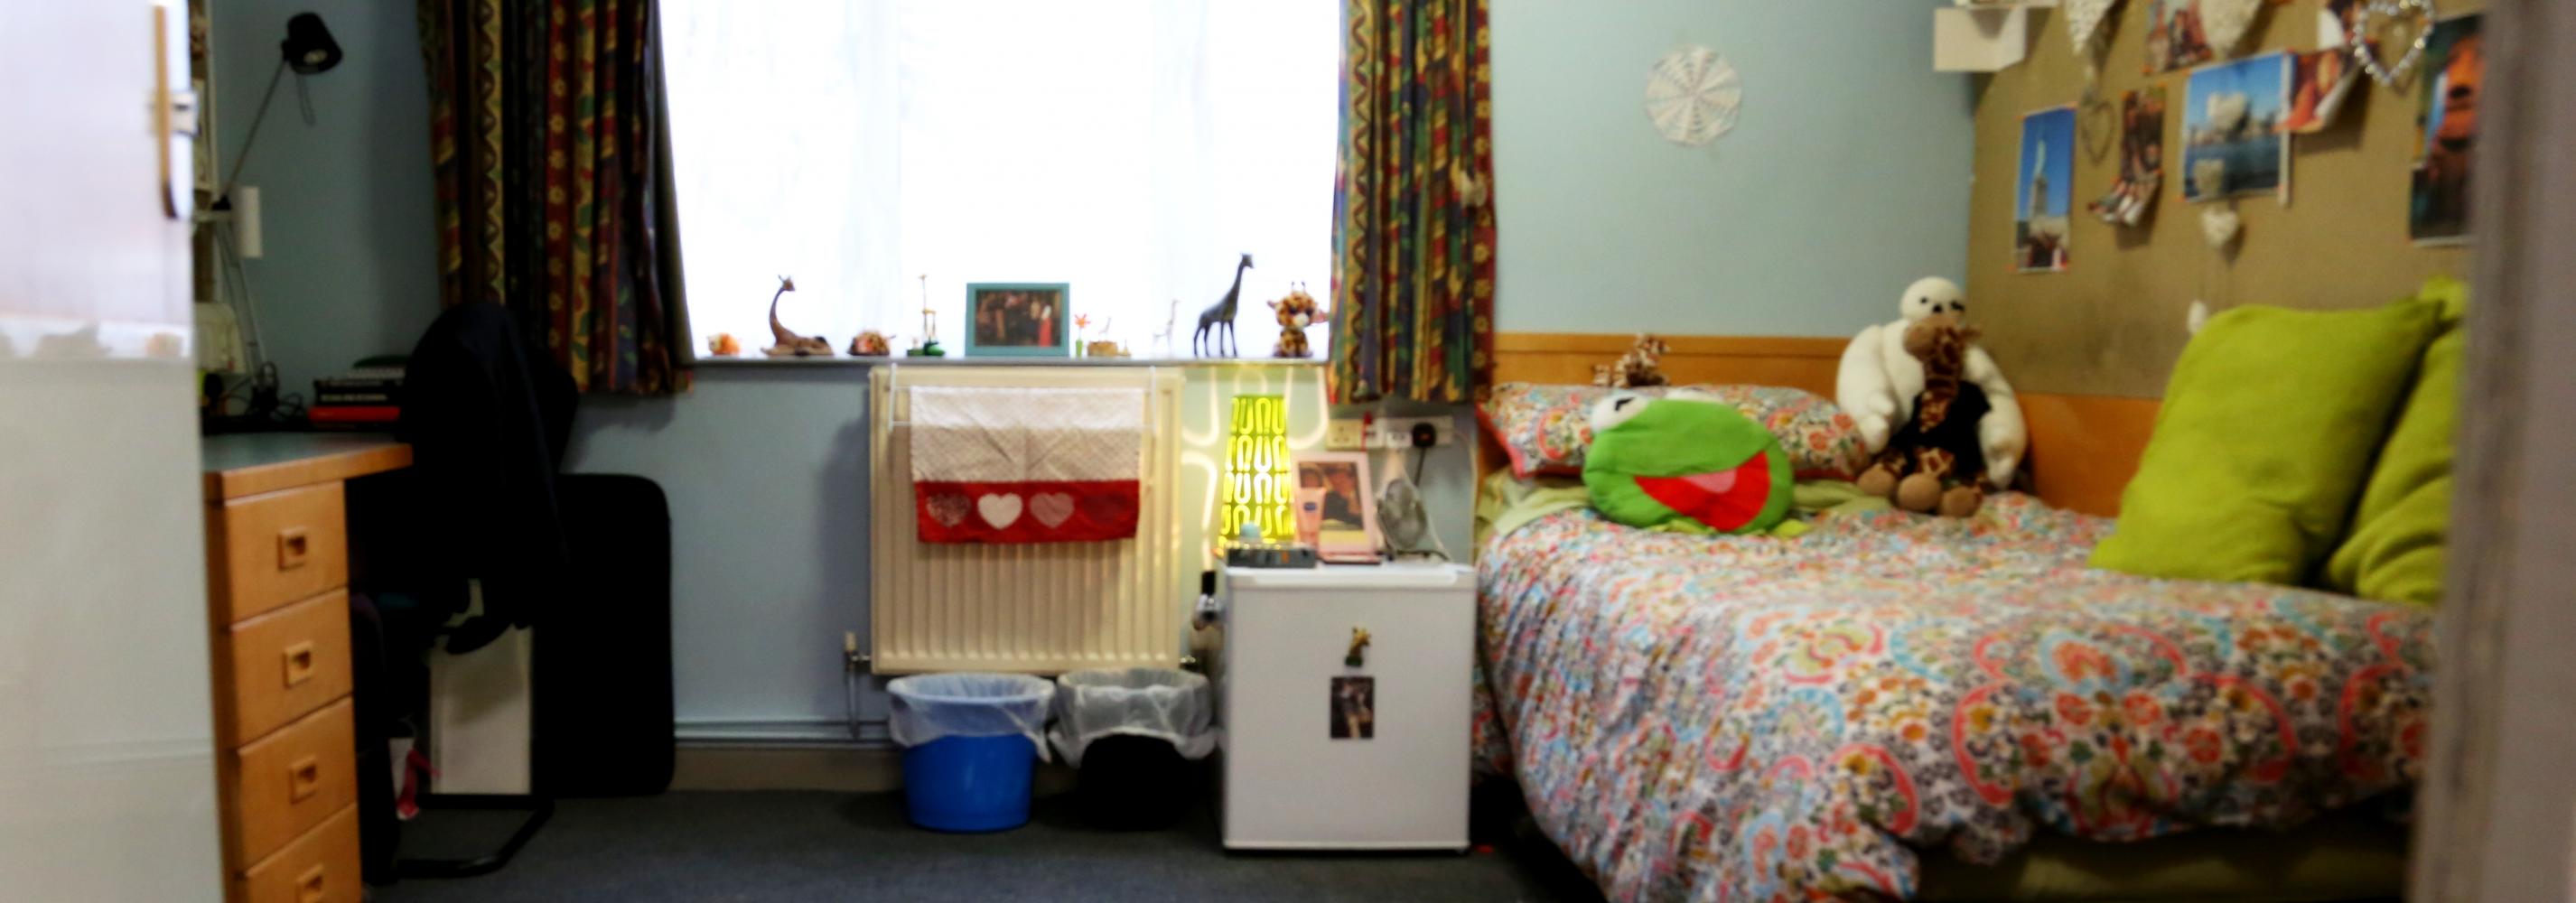 Adapted bedroom, bed, noticeboard, window, curtains, radiator, desk and chair